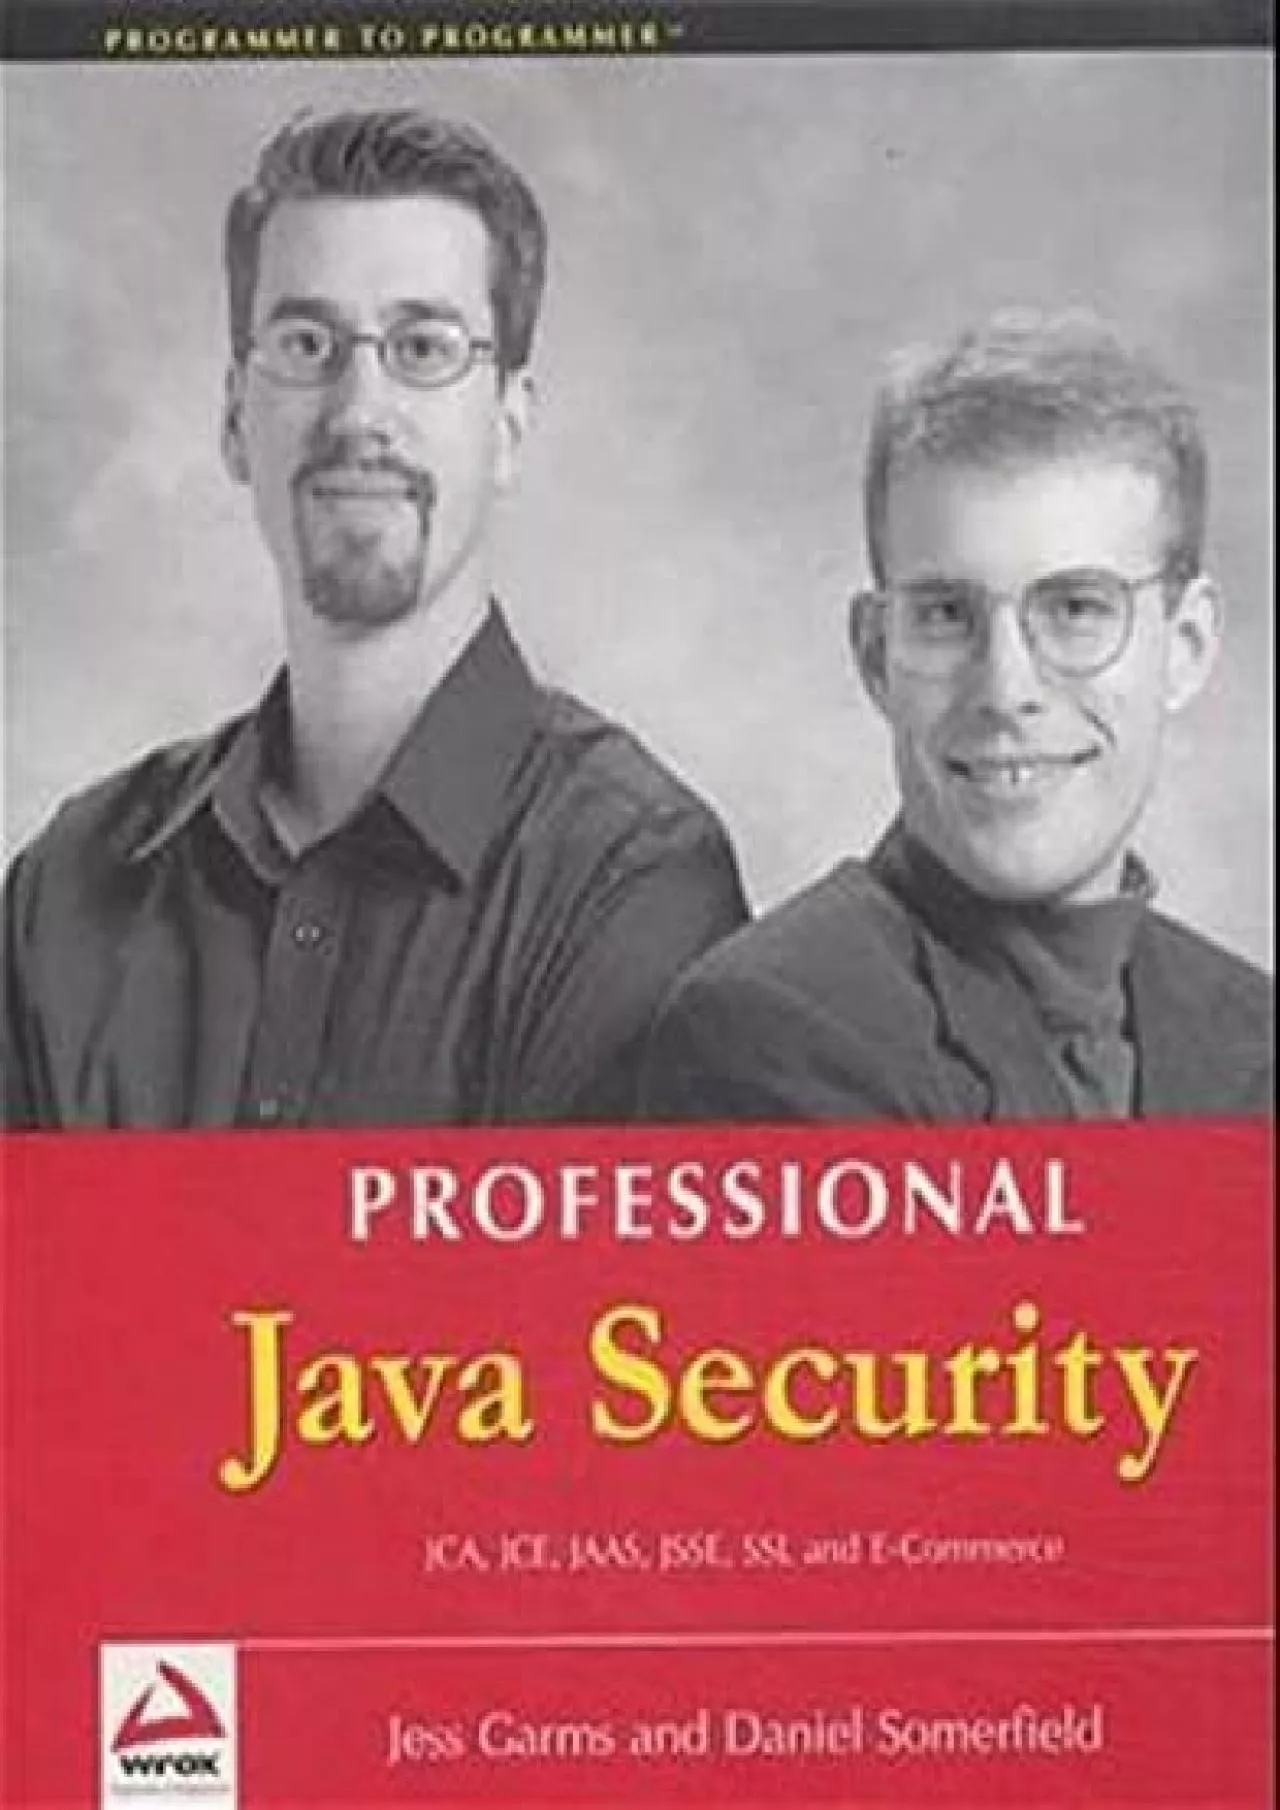 [BEST]-Professional Java Security (Programmer to Programmer)